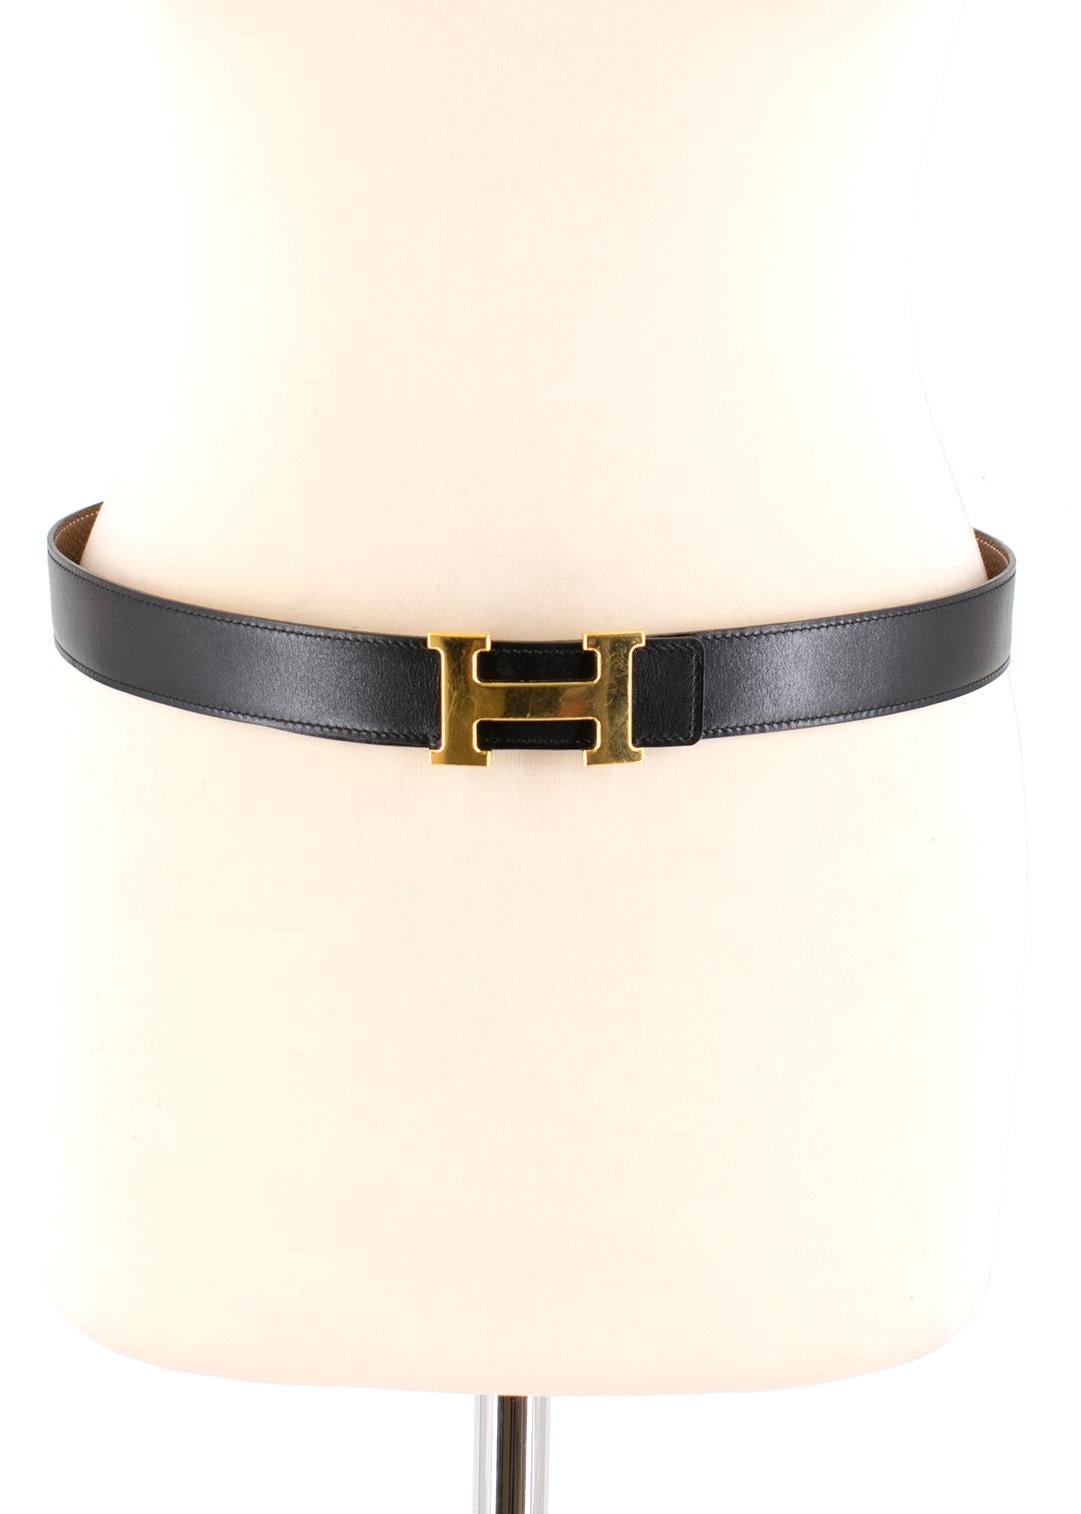 Hermes Black Leather Belt with Gold Buckle

Age - 2011 [o]
Belt buckle in brushed permabrass plated metal
Reversible leather strap in 135 and Togo calfskin 
Constance H Buckle
Contrasting white stitching
Three holes


Approx;
Width- 3.2cm
Length-